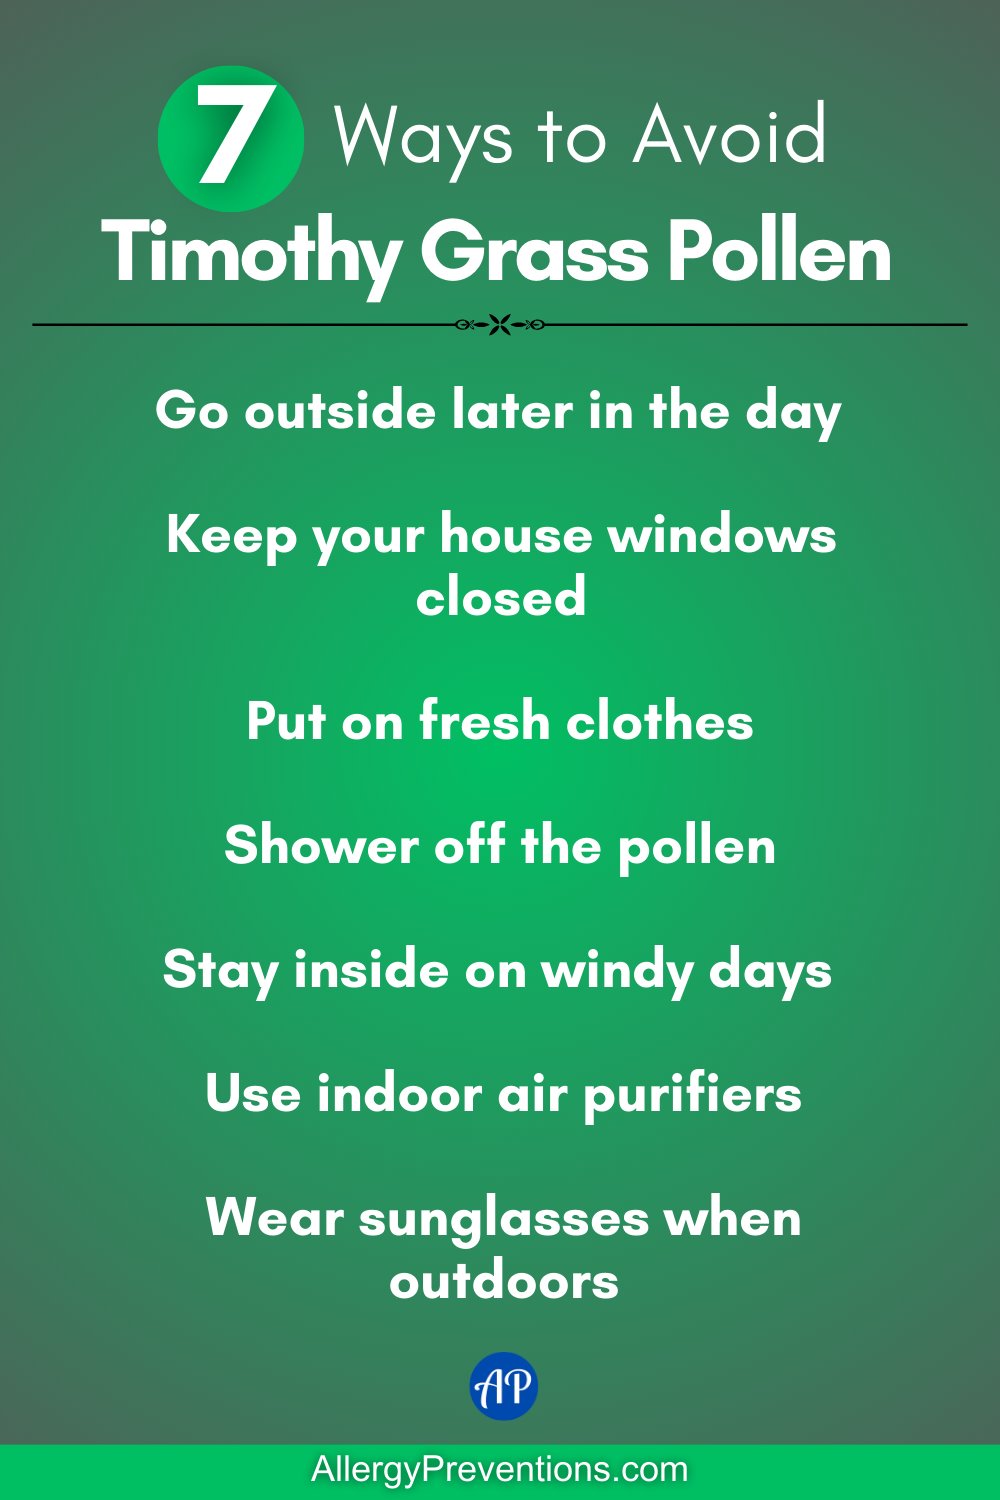 Ways to avoid Timothy grass pollen infographic. Put on fresh clothes, Go outside later in the day, Keep your house windows closed, Shower off the pollen, Stay inside on windy days, Use indoor air purifiers, and Wear sunglasses when outdoors.